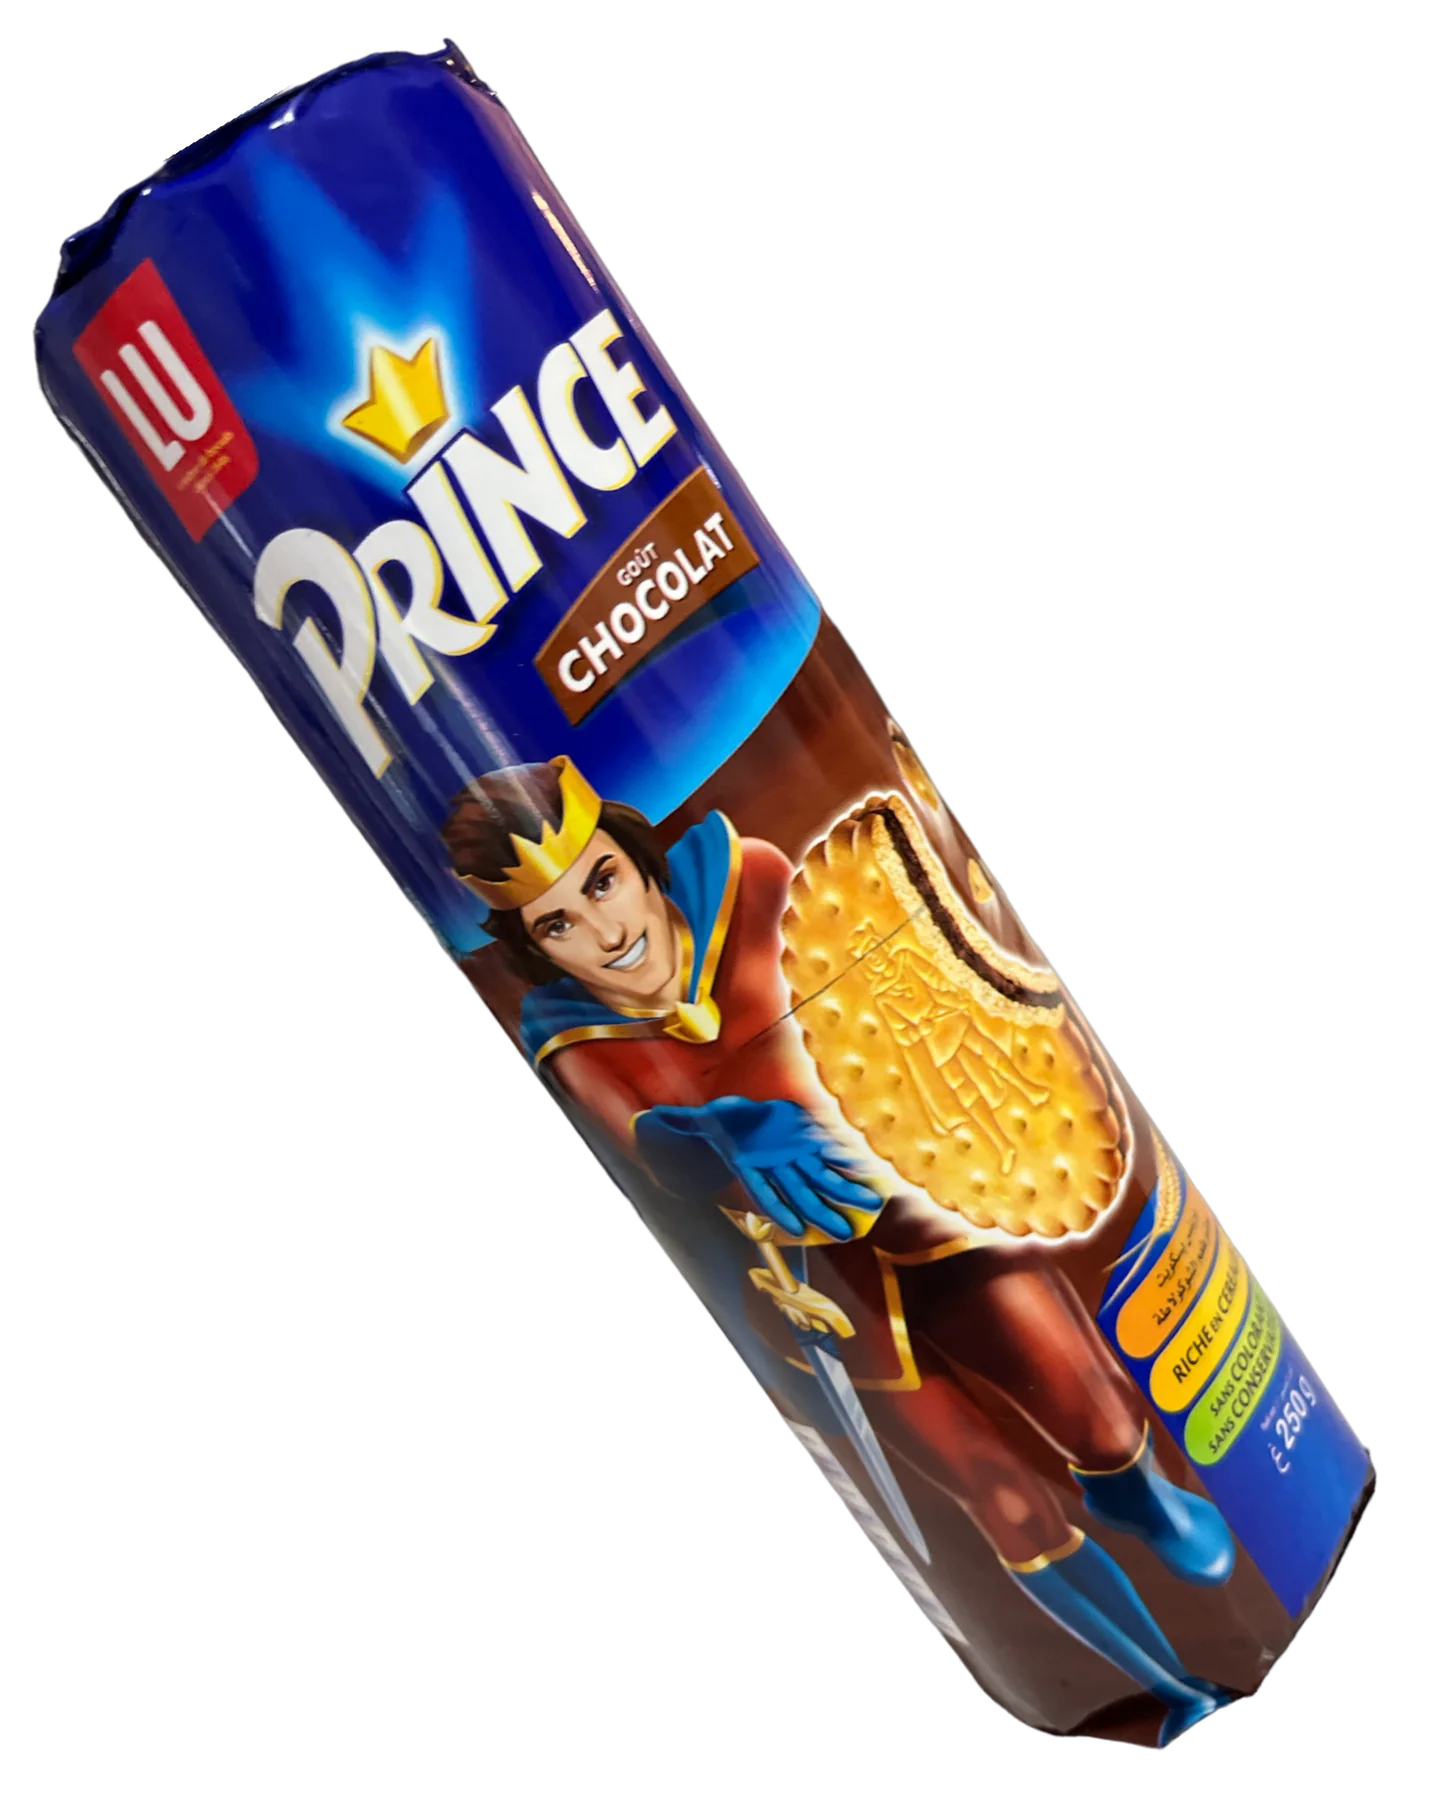 Prince Sandwich Biscuits by LU - France